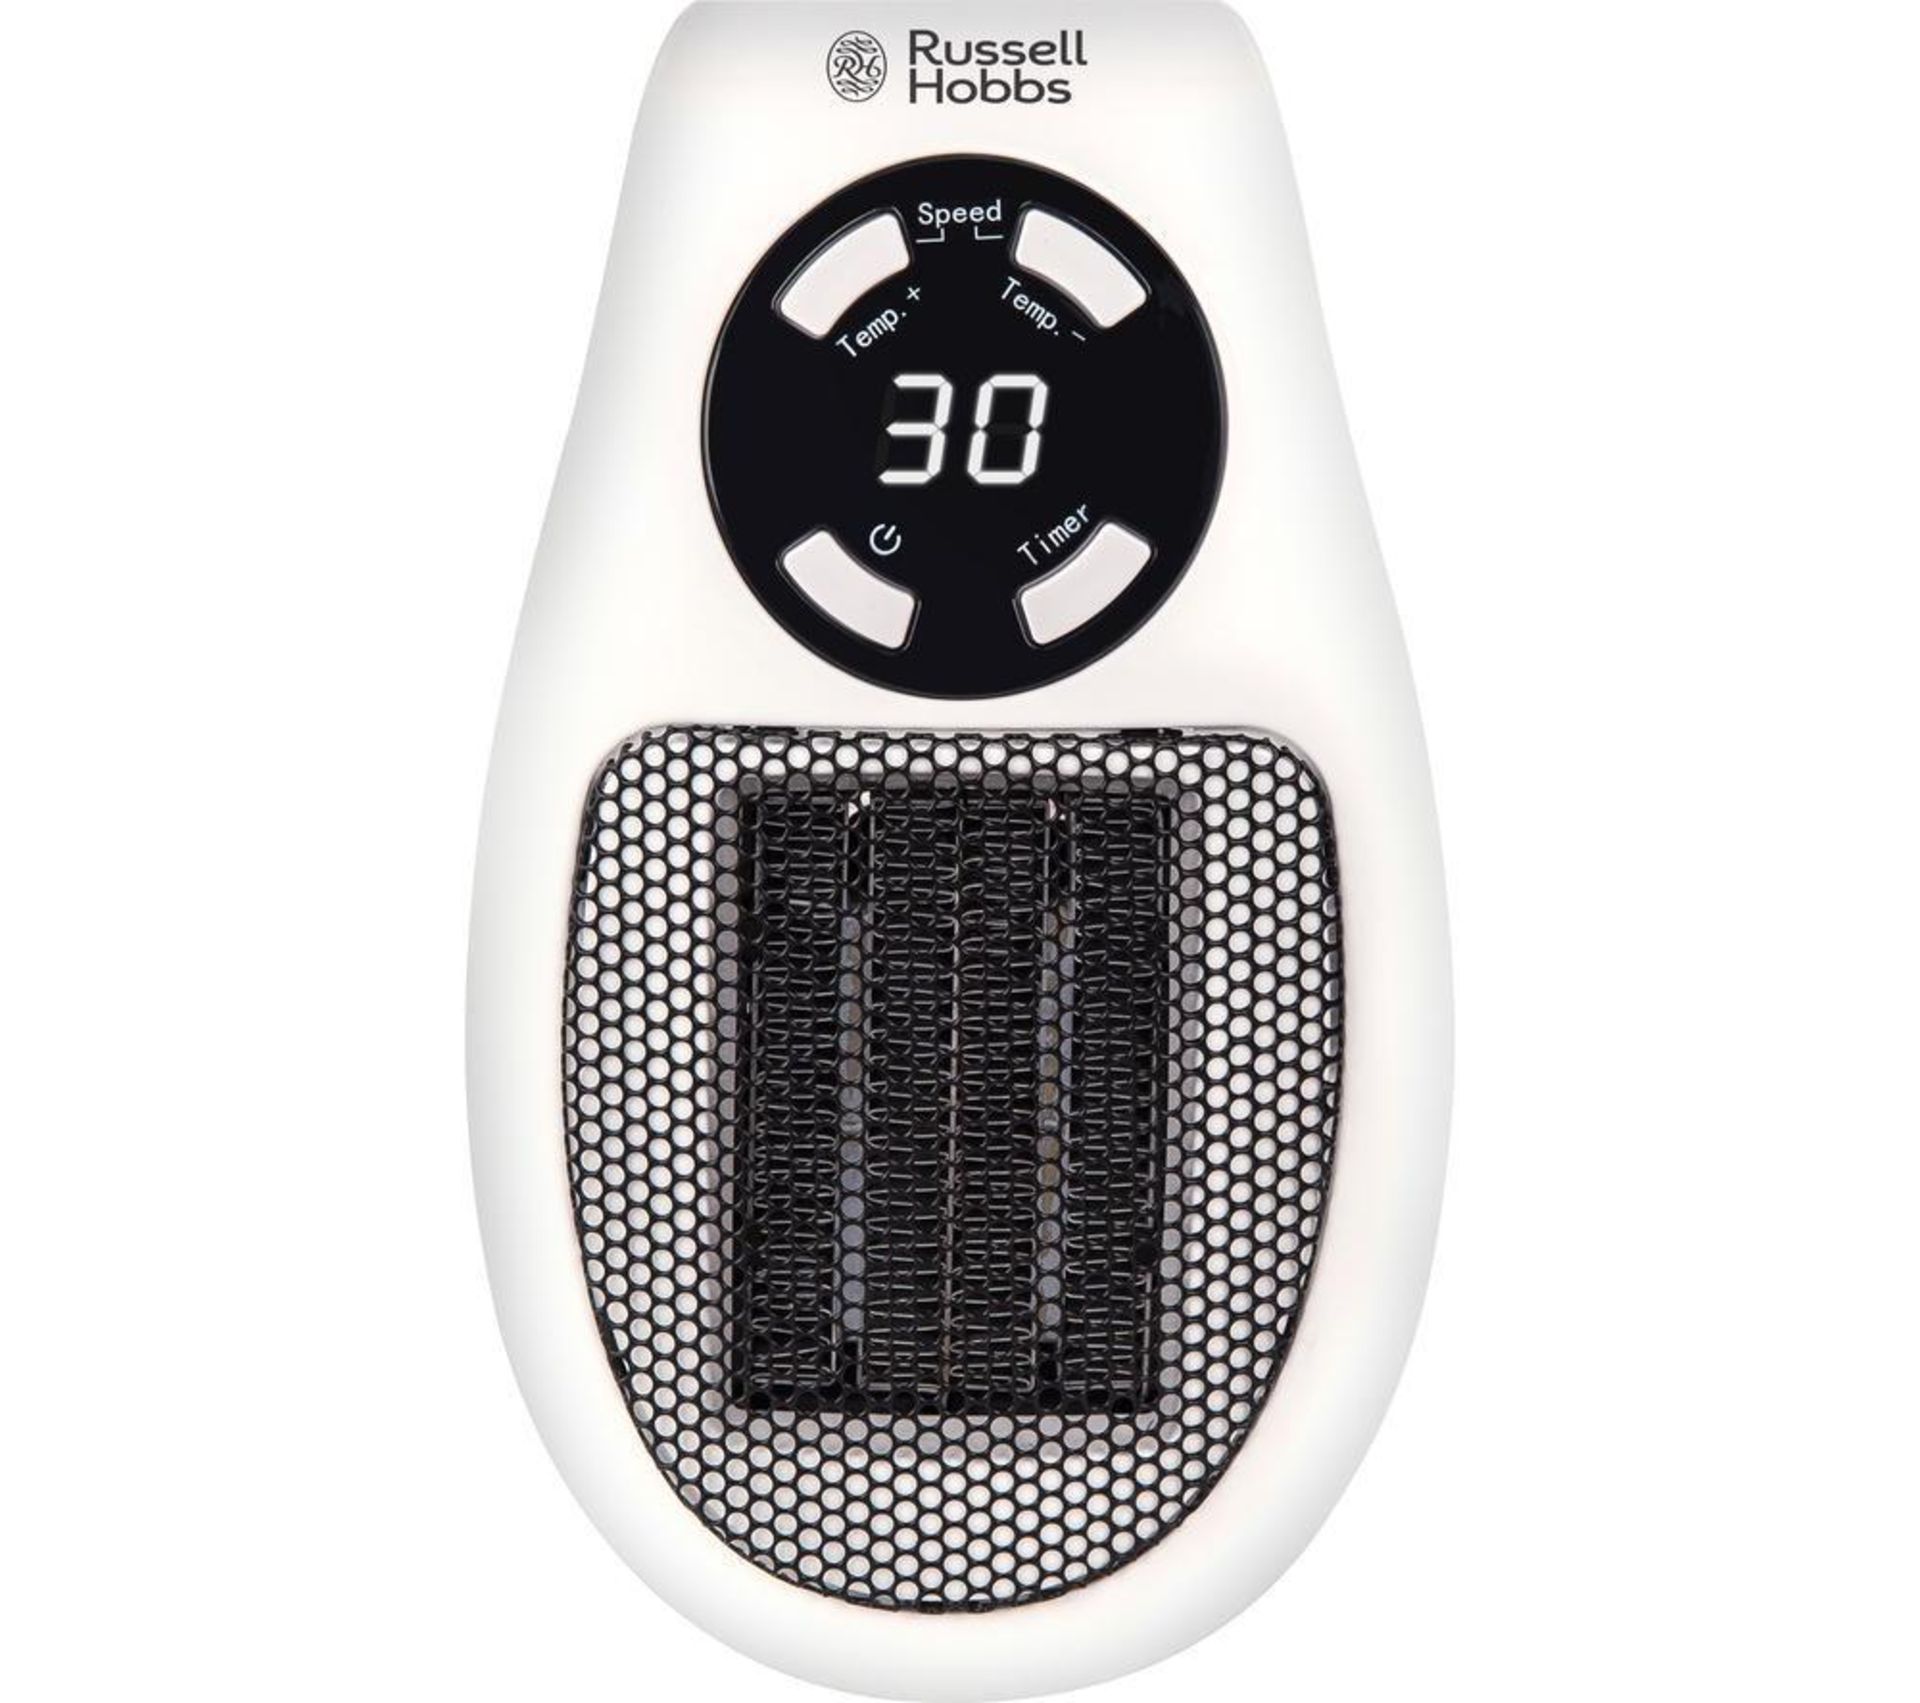 Russell Hobbs 500W Plug-in Heater - ER47. This Russell Hobbs 500W Plug-In Heater is the perfect